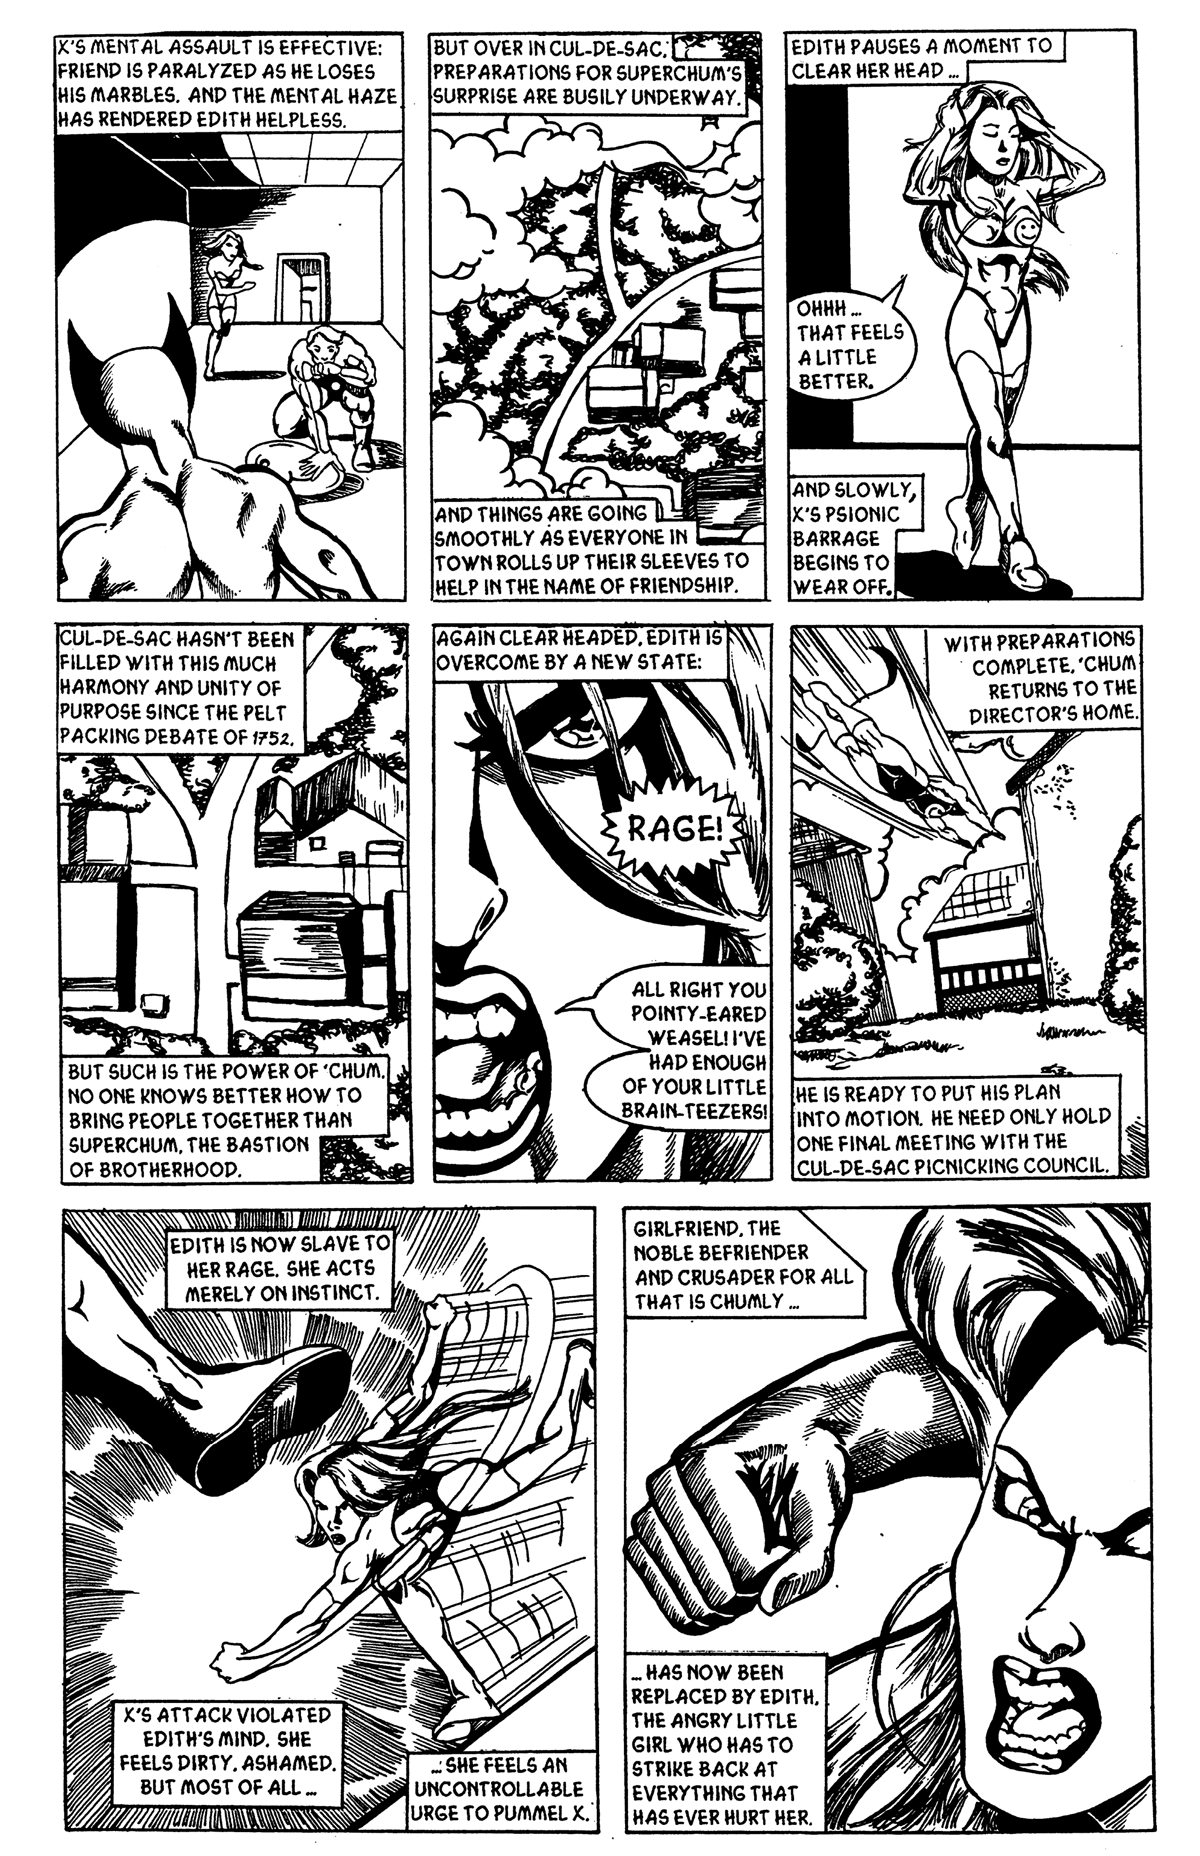 Early Superchum comic strip in black and white